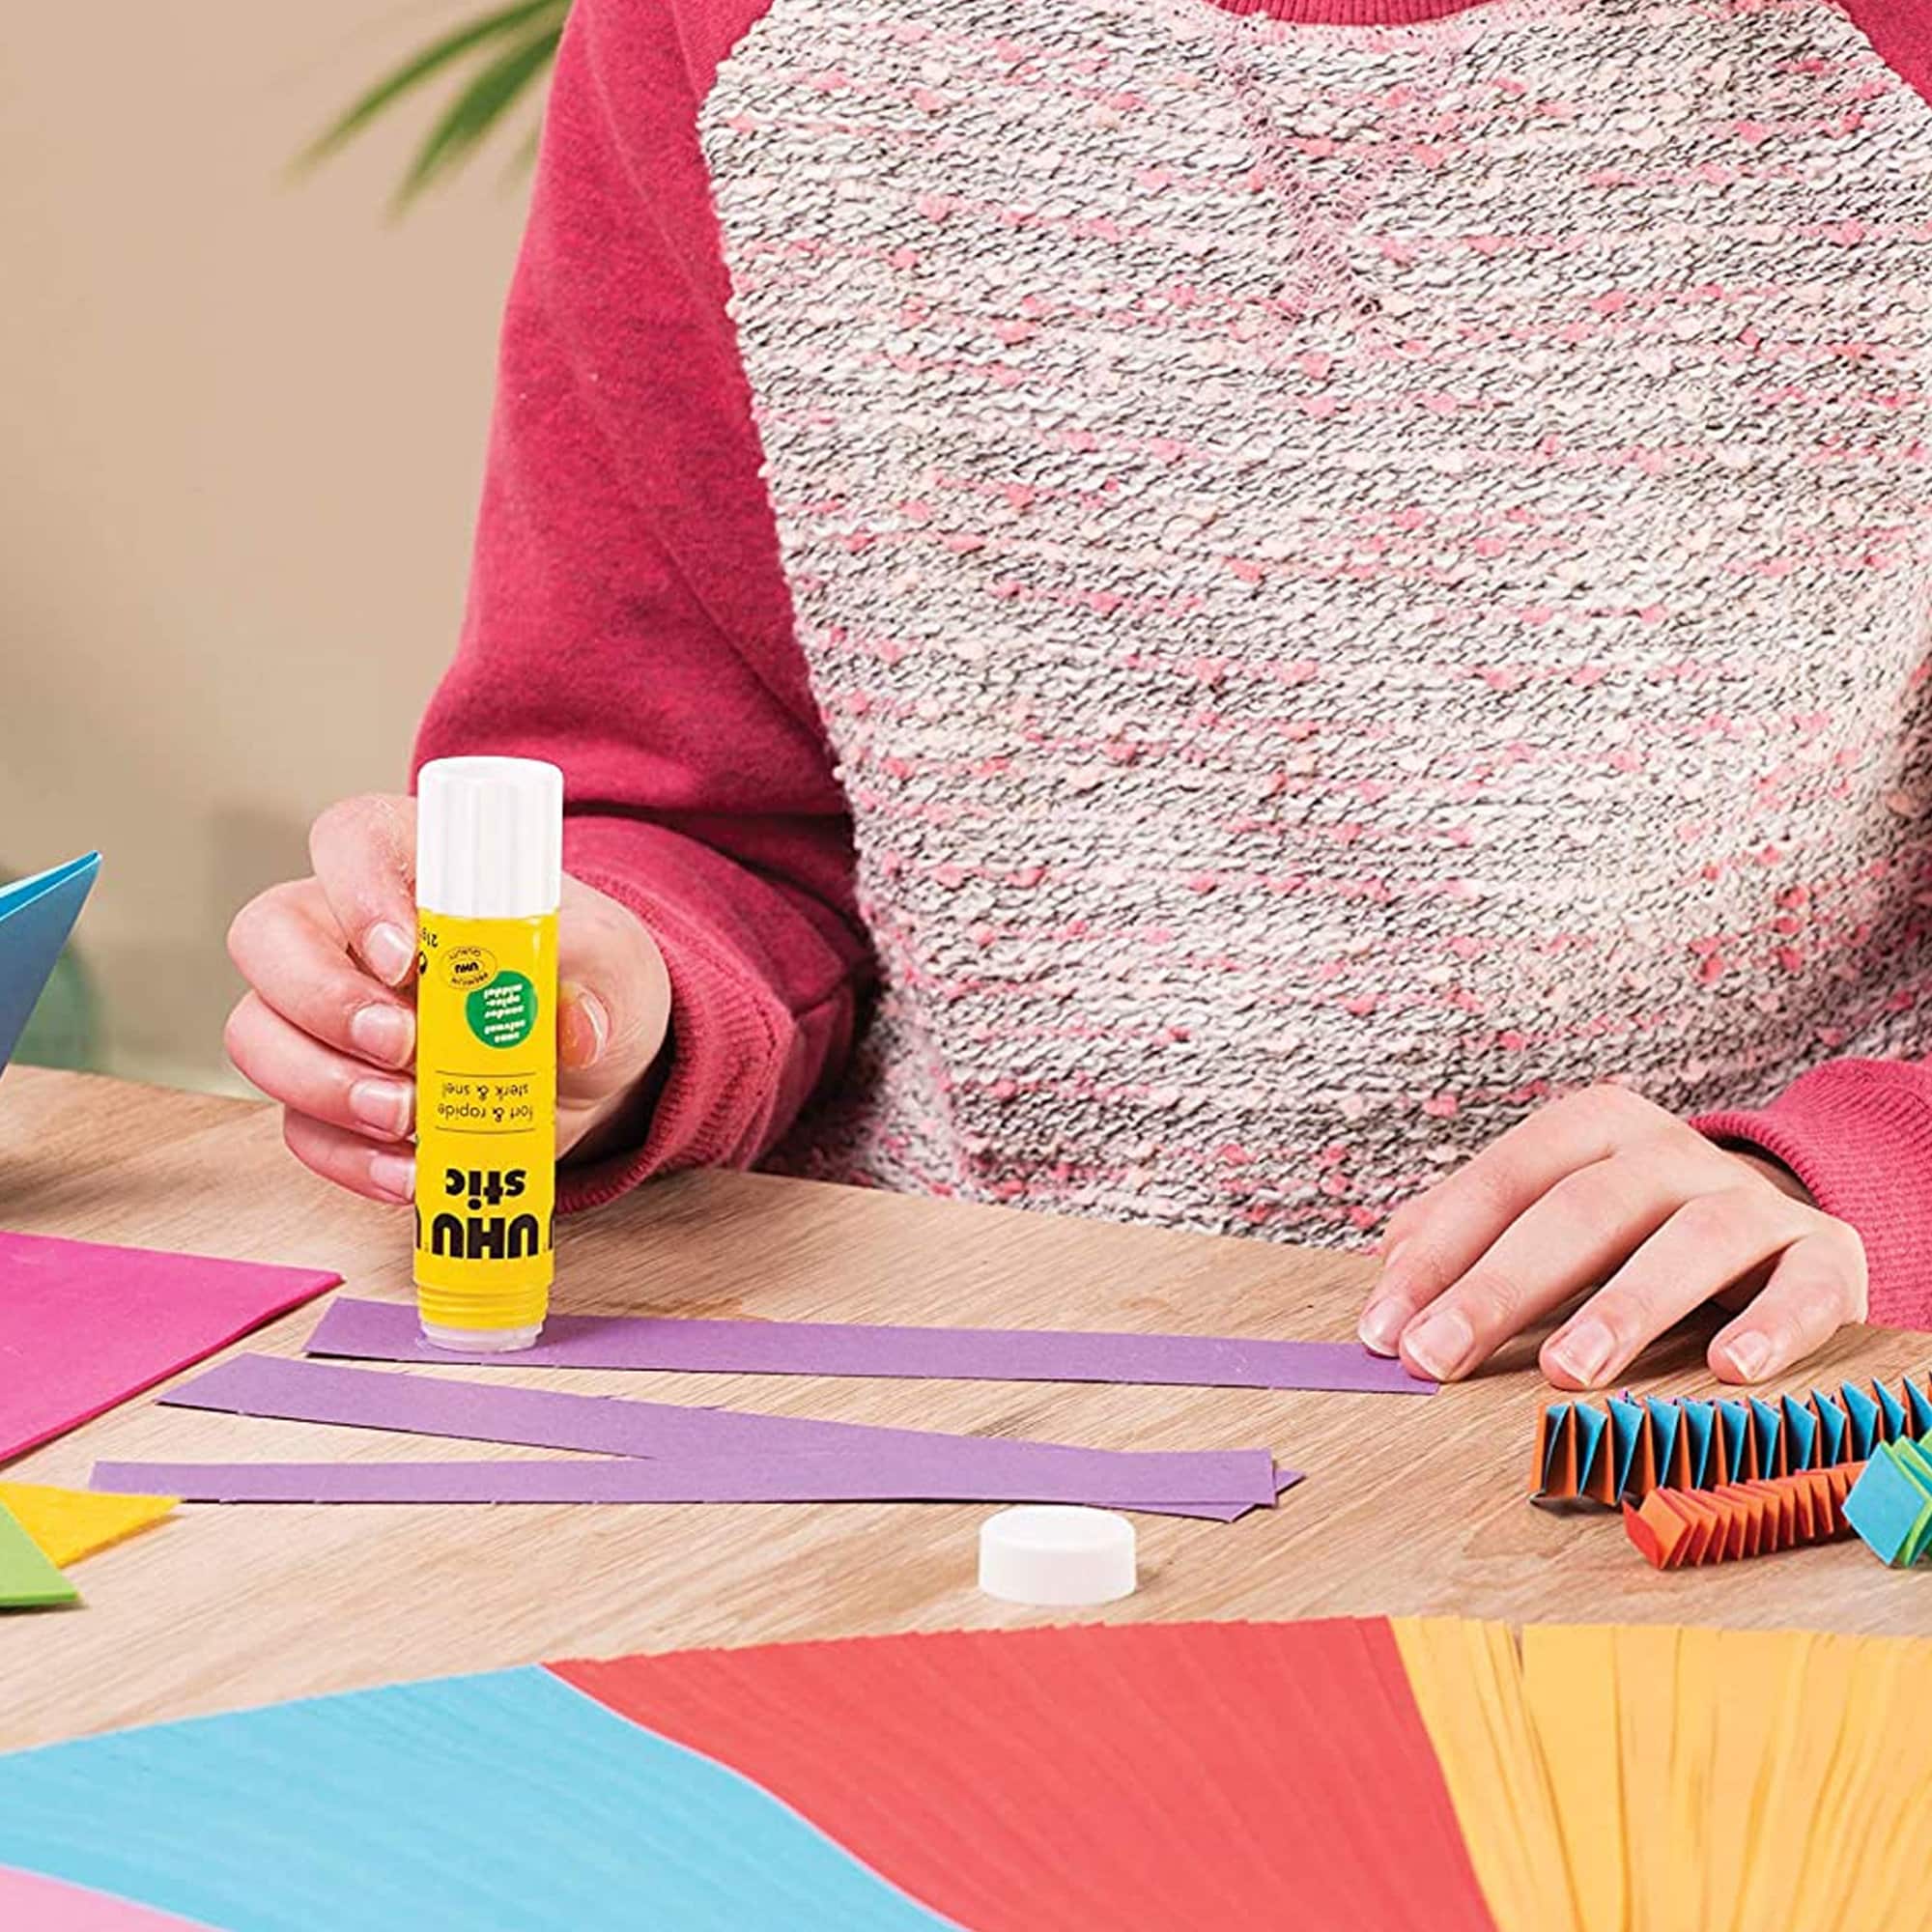 Glue Uhu Is Strong Enough To Stick Firmly. Glue Wood, Wood, Wood Models,  Rubber Leather, Soft Glue, And Soft Adhesive Are Availa - AliExpress